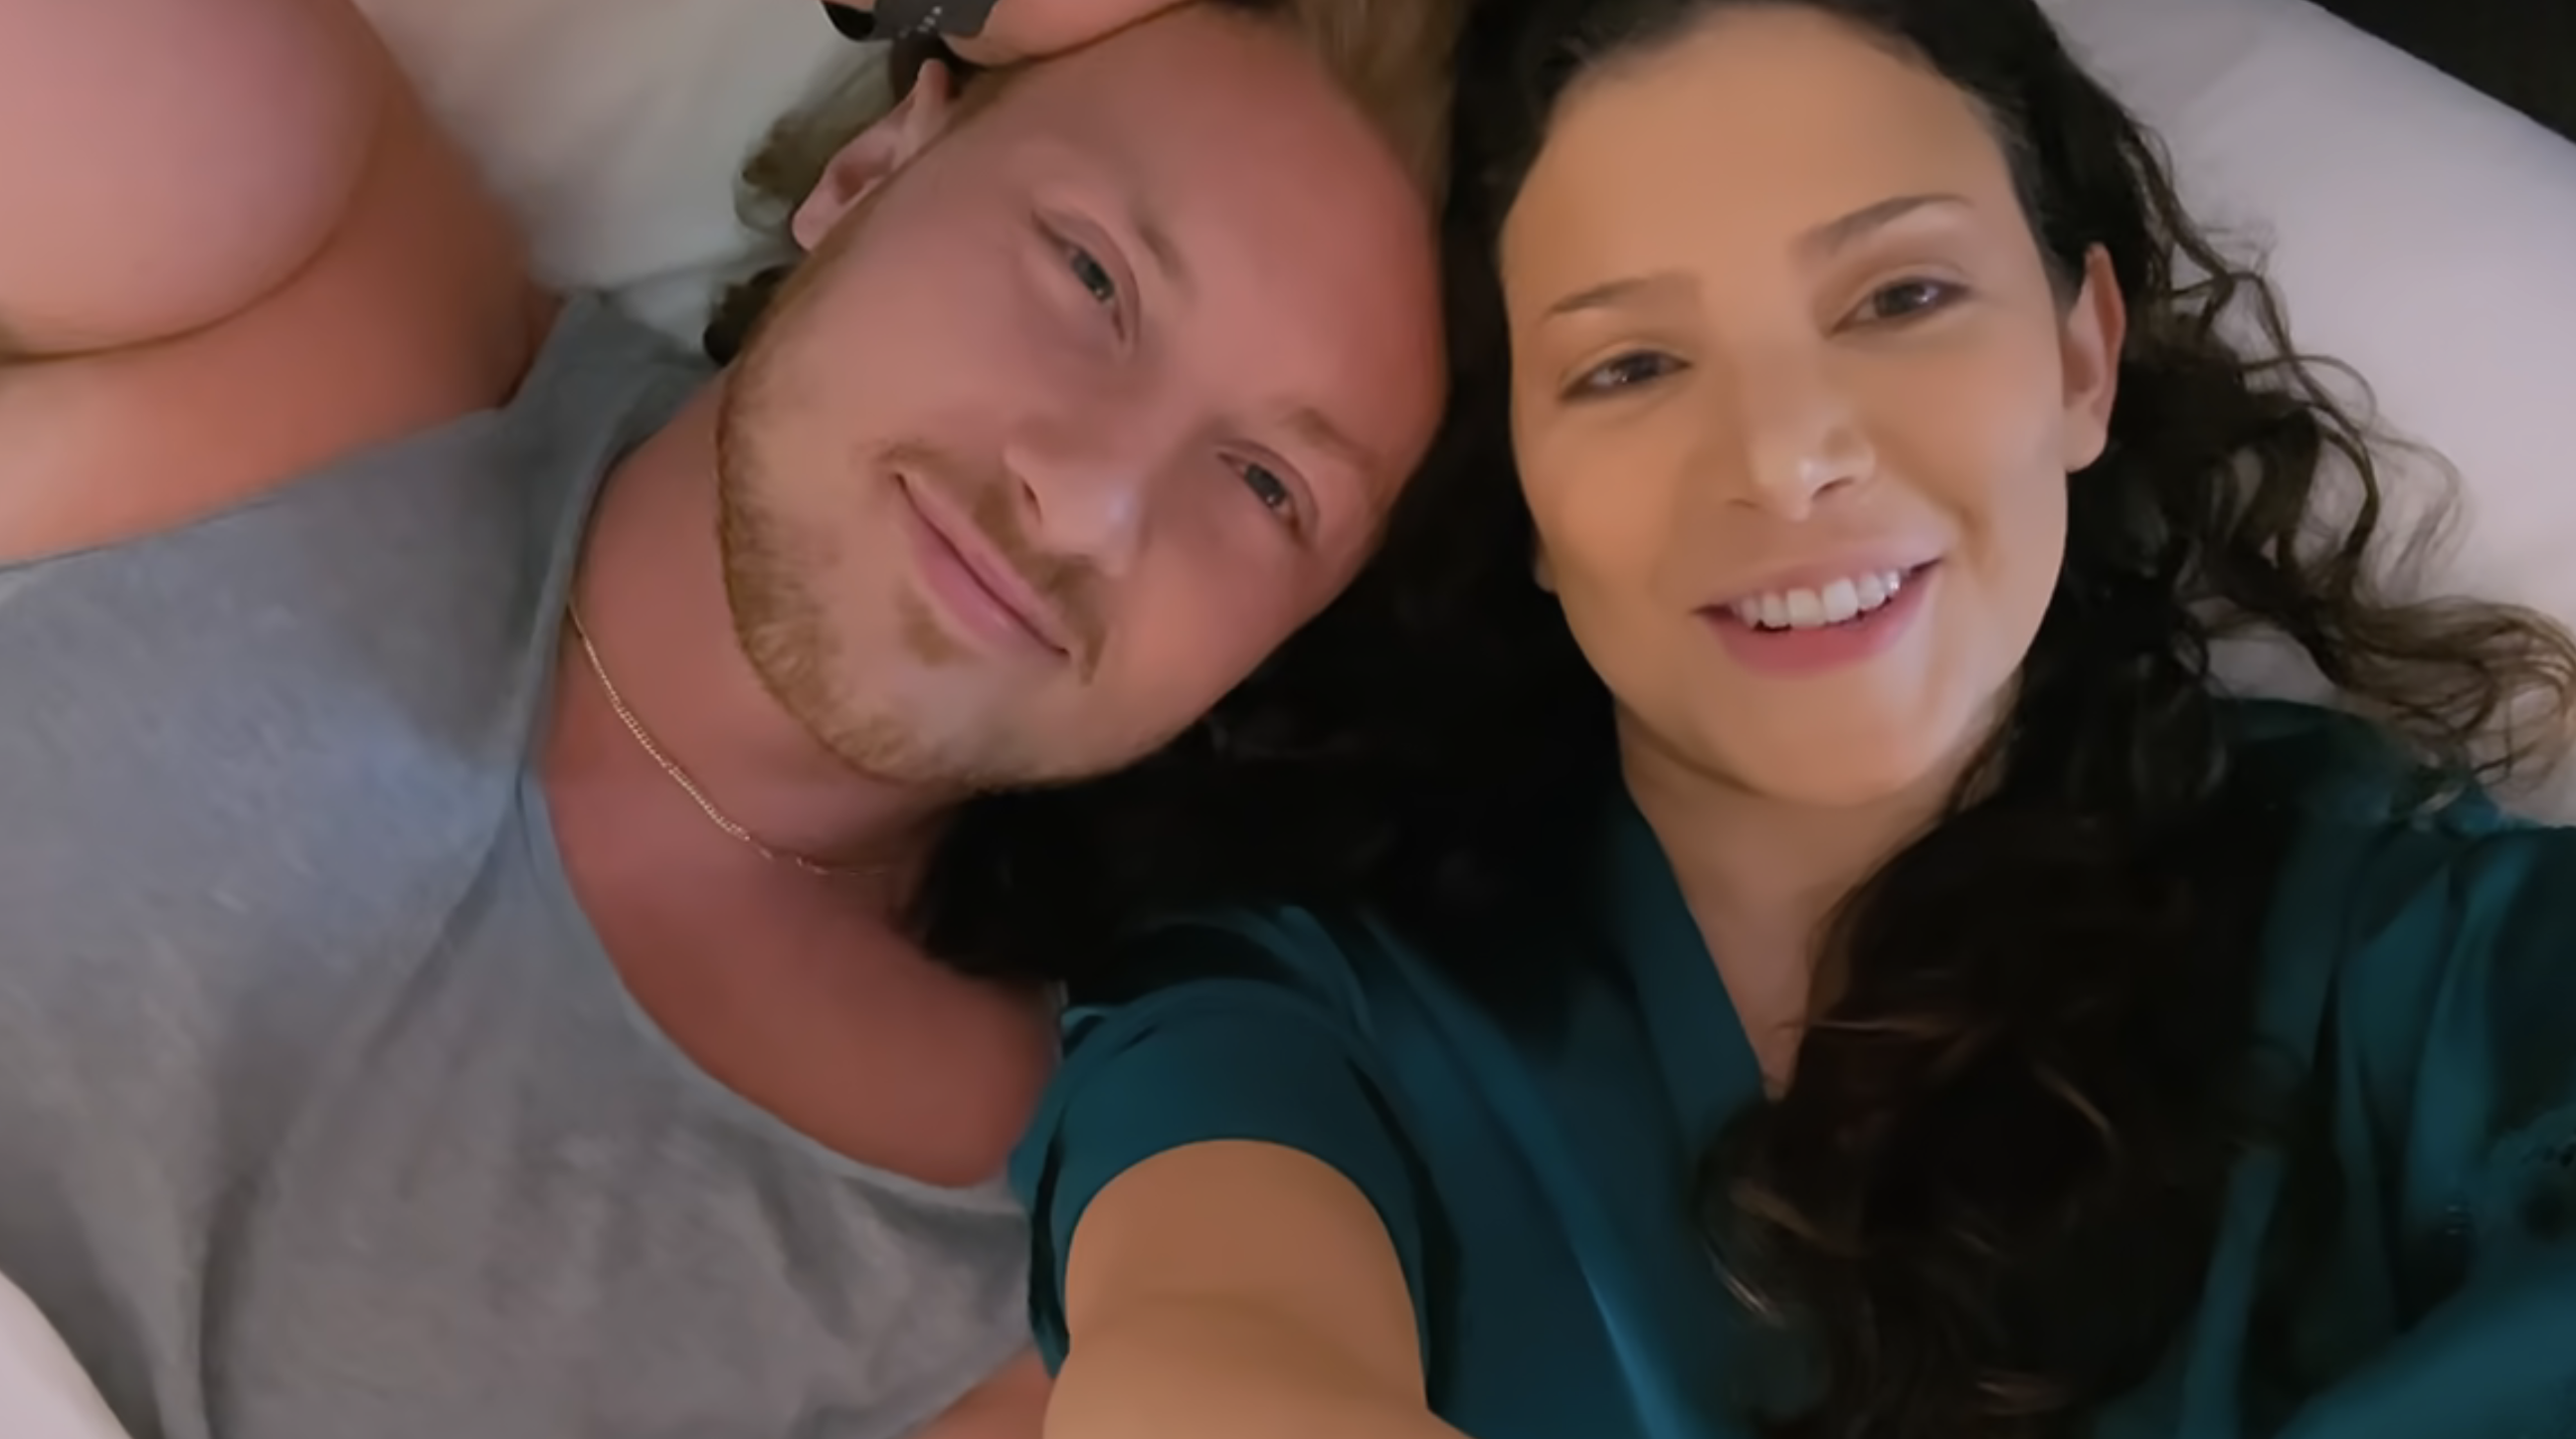 Amy and Johnny smiling while lying down, close-up selfie view